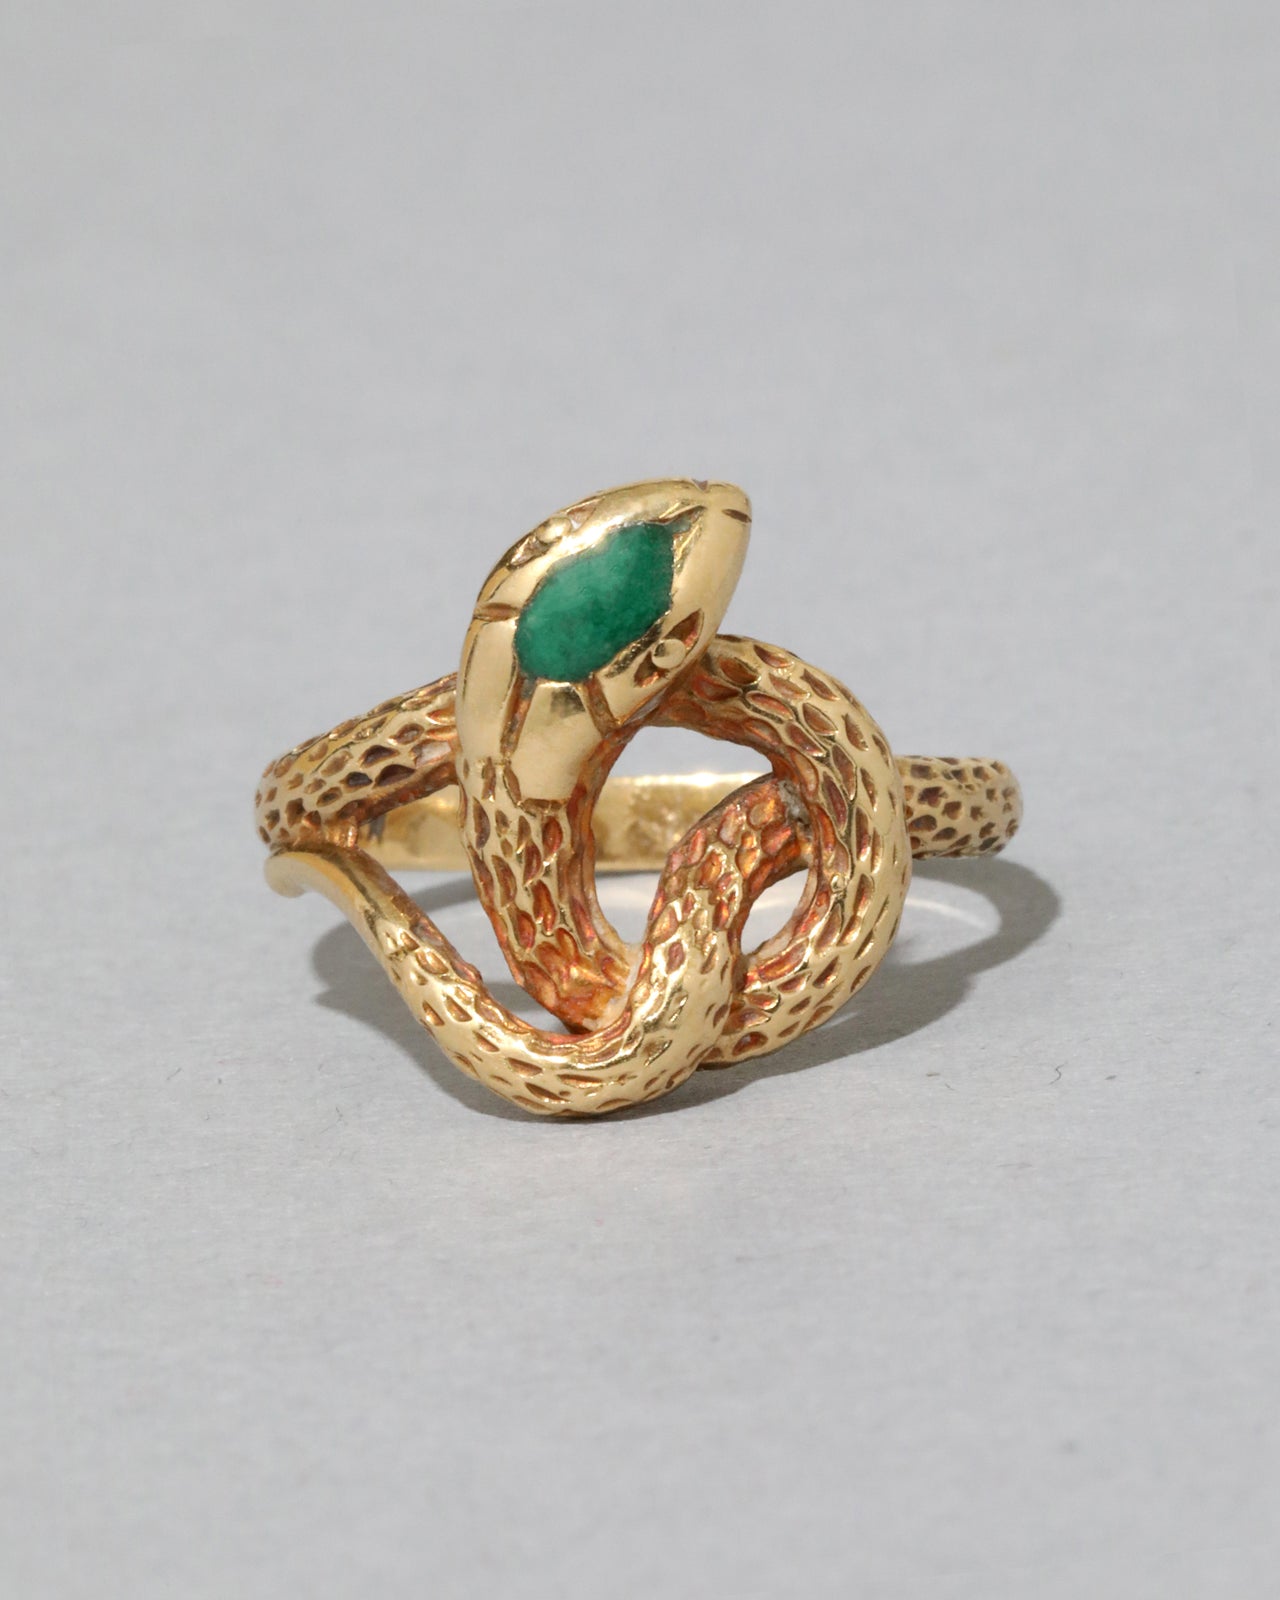 Vintage 14k Gold Snake Love Knot Ring with Green Enamel - Photo 2